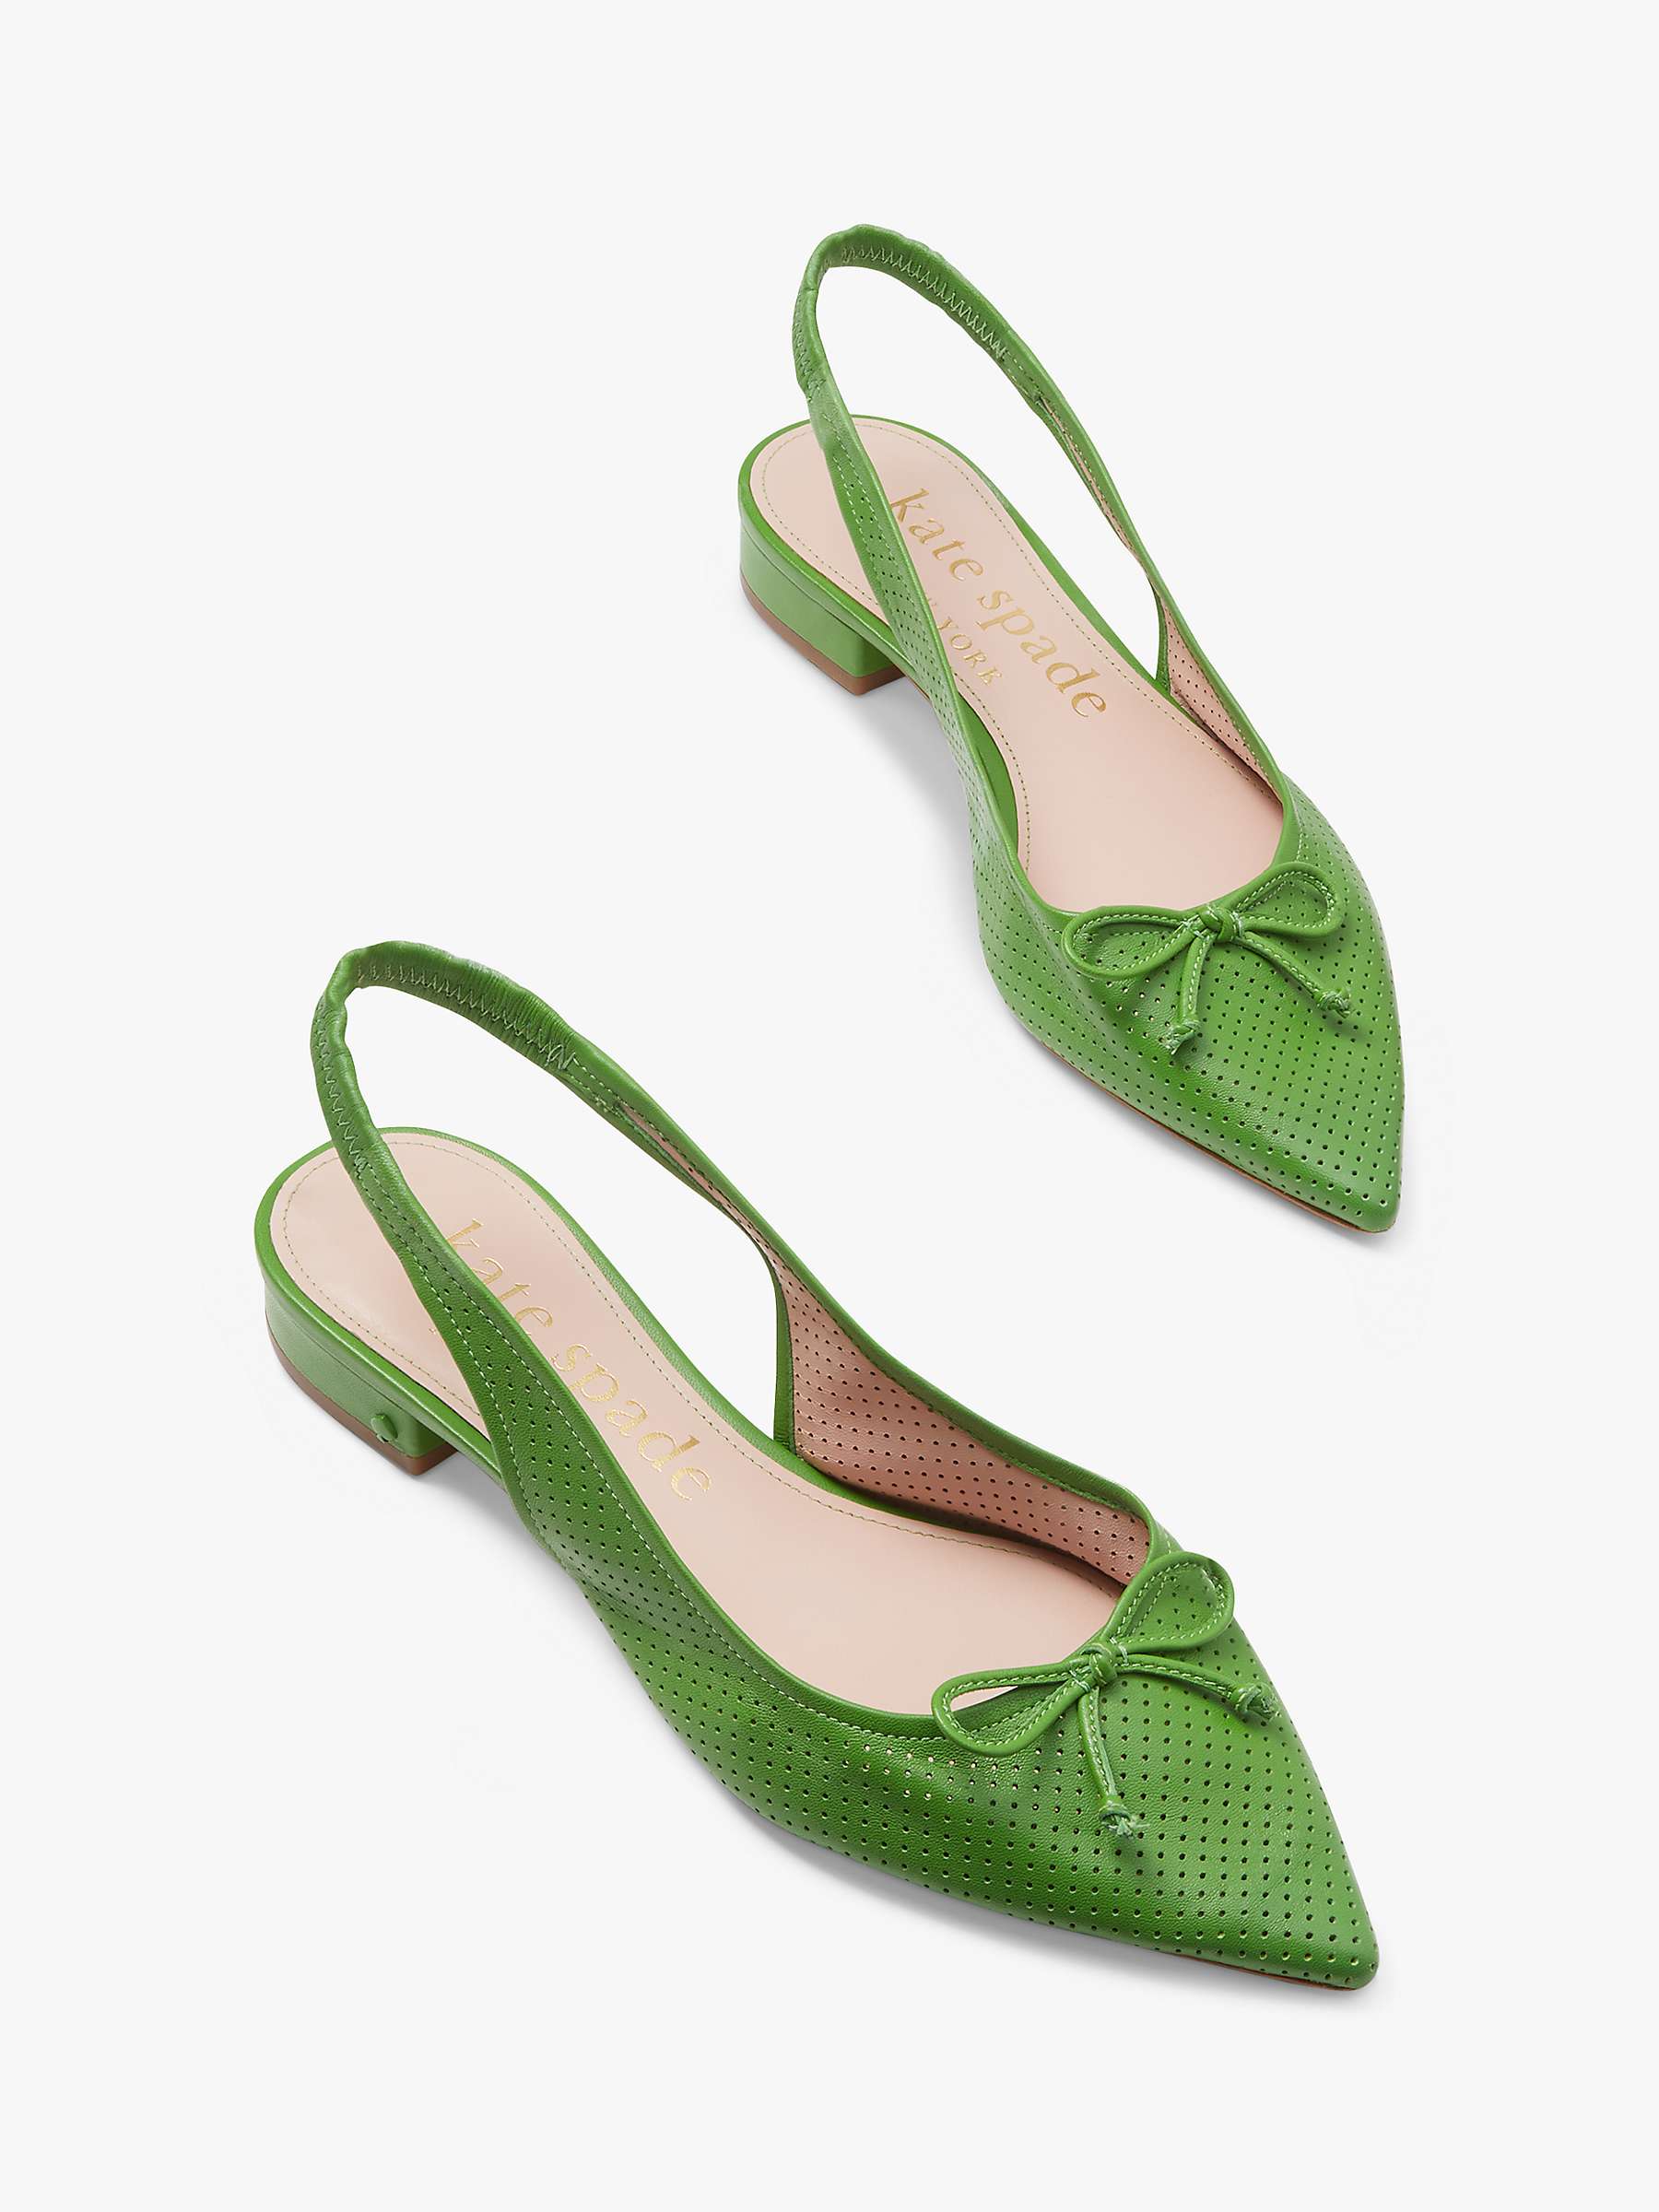 Buy kate spade new york Veronica Perforated Leather Pointed Pumps Online at johnlewis.com